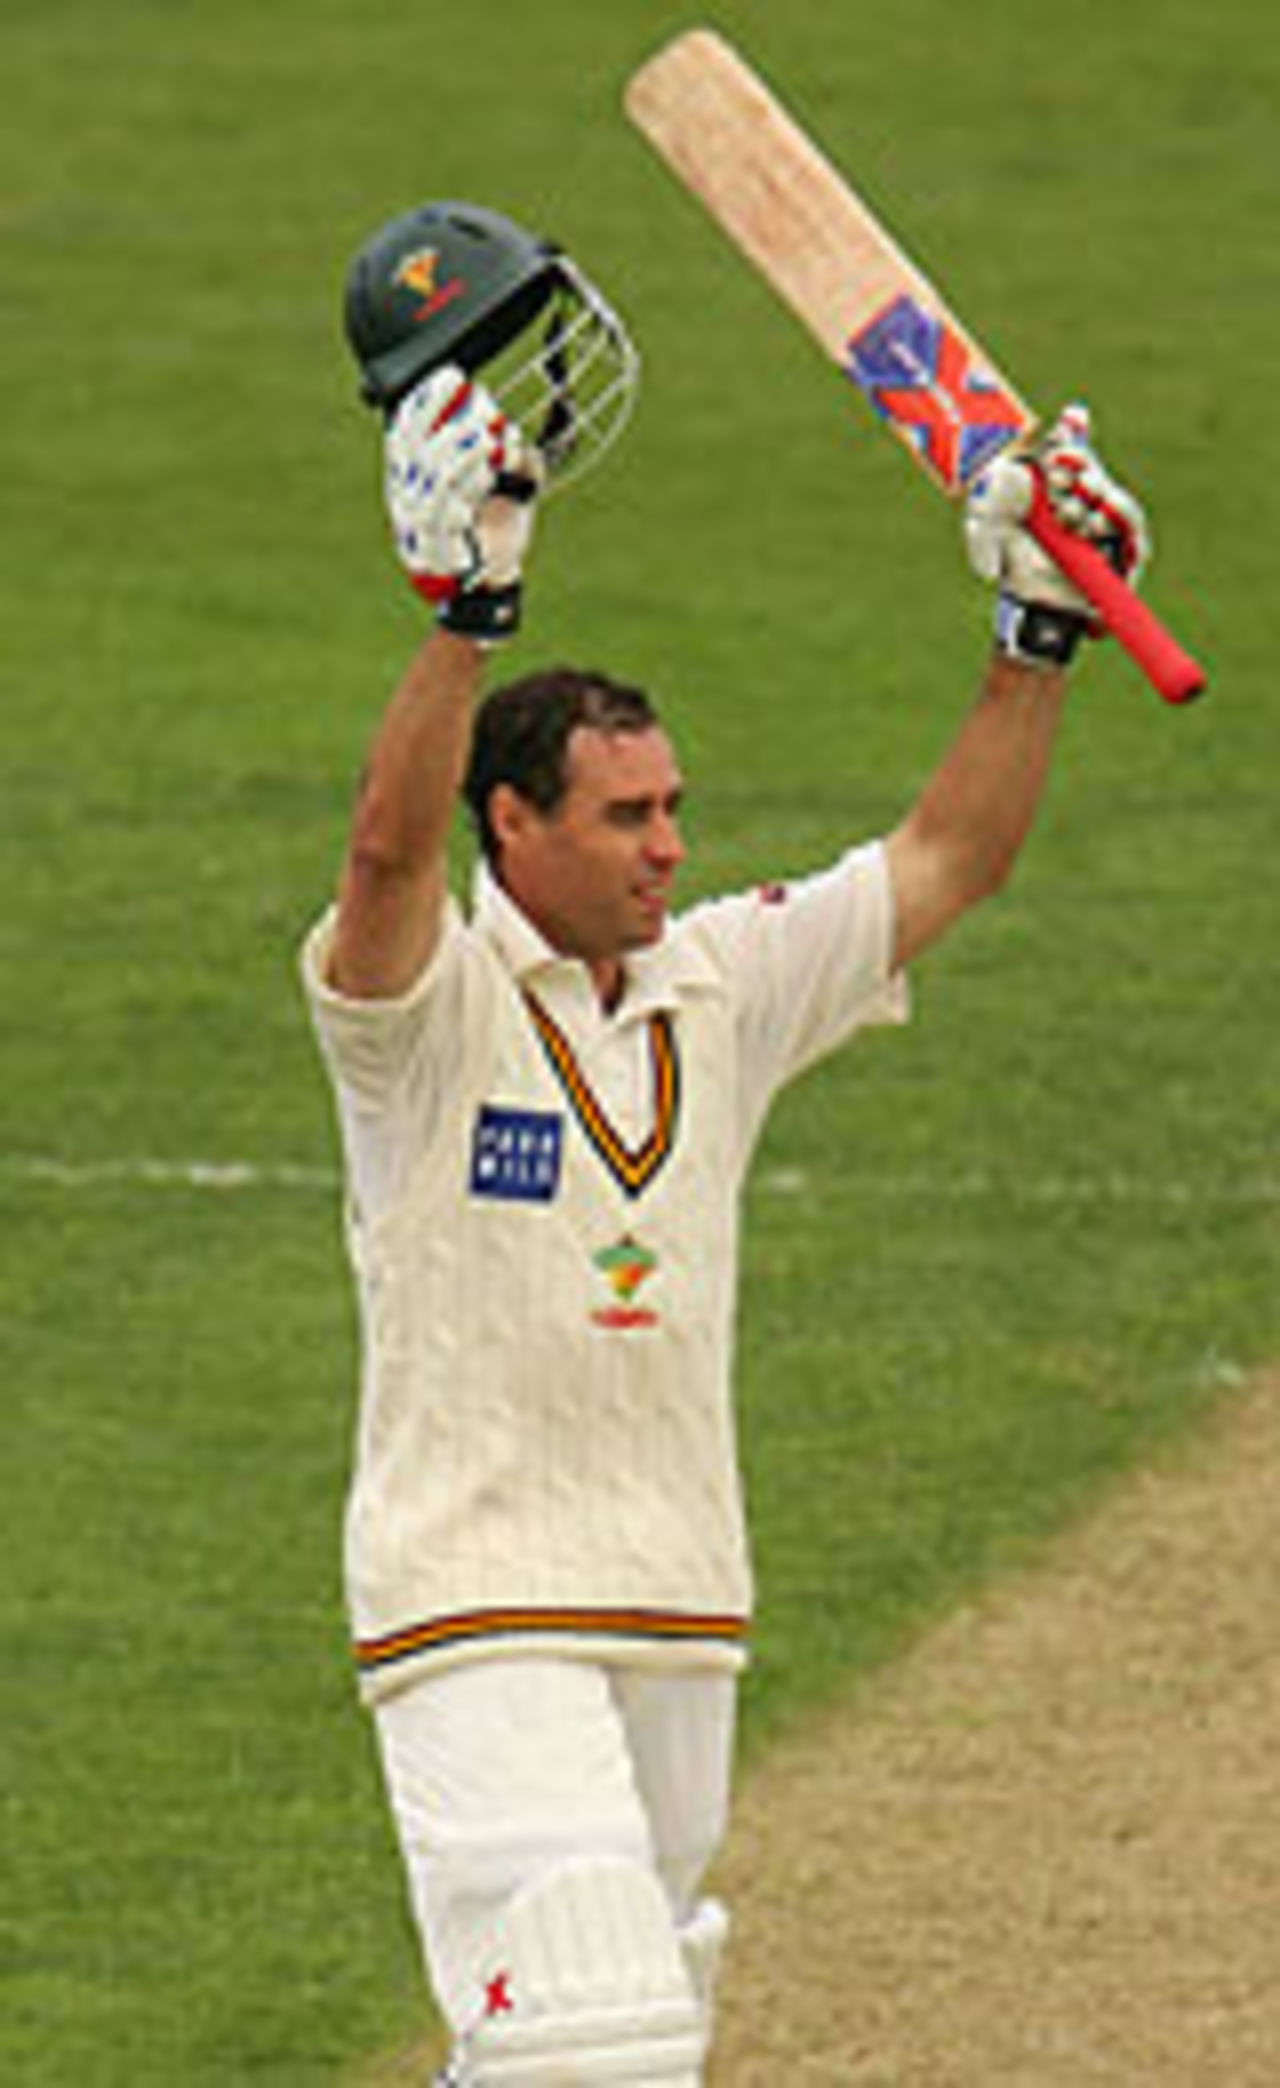 Michael Bevan acknowledges applause for his century, Tasmania v South Australia, Pura Cup, Hobart, 1st day, November 16, 2004